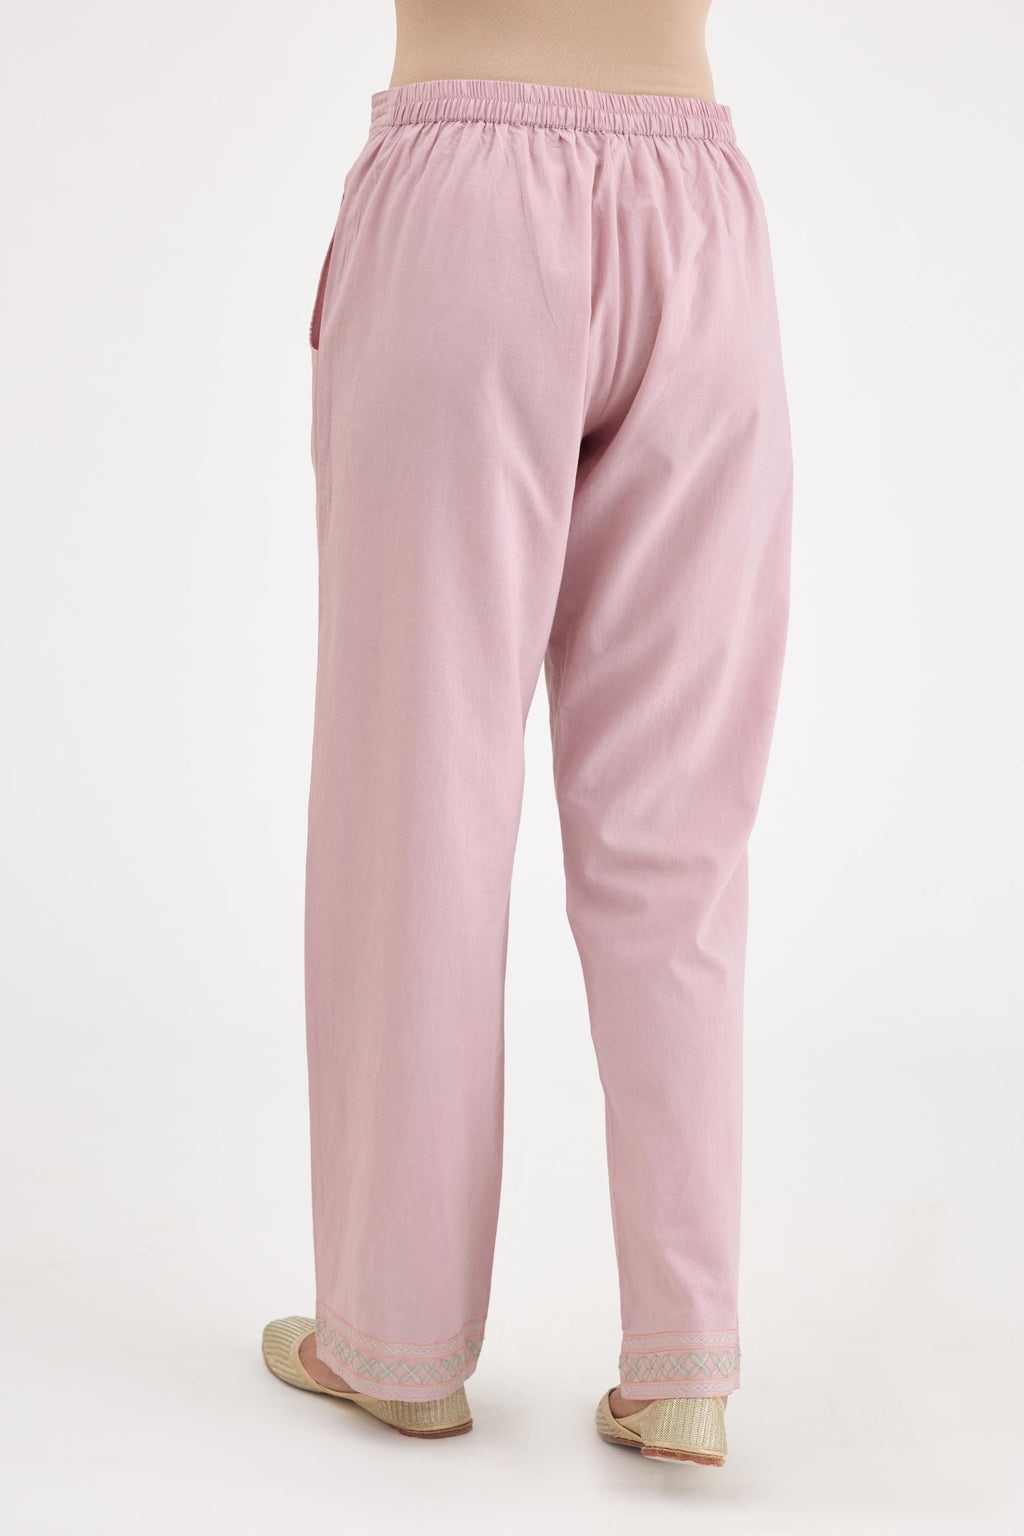 Pink cotton straight pants with multi colored thread embroidery, highlighted with silver zari embroidery at bottom hem